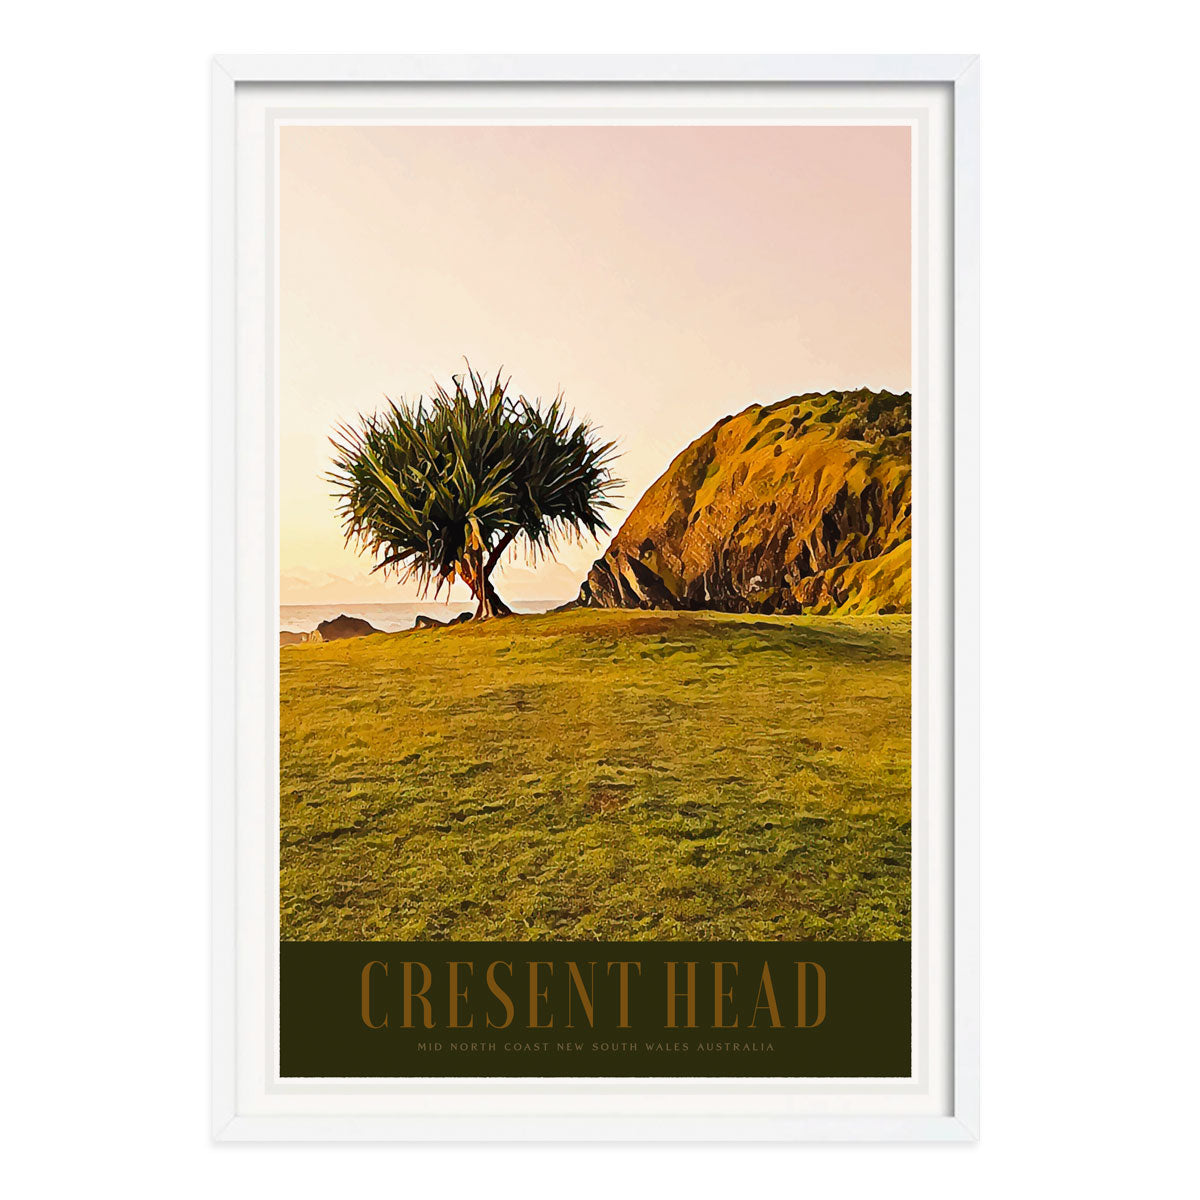 Cresent Head NSW Australia retro vintage poster print in white frame from Places We Luv